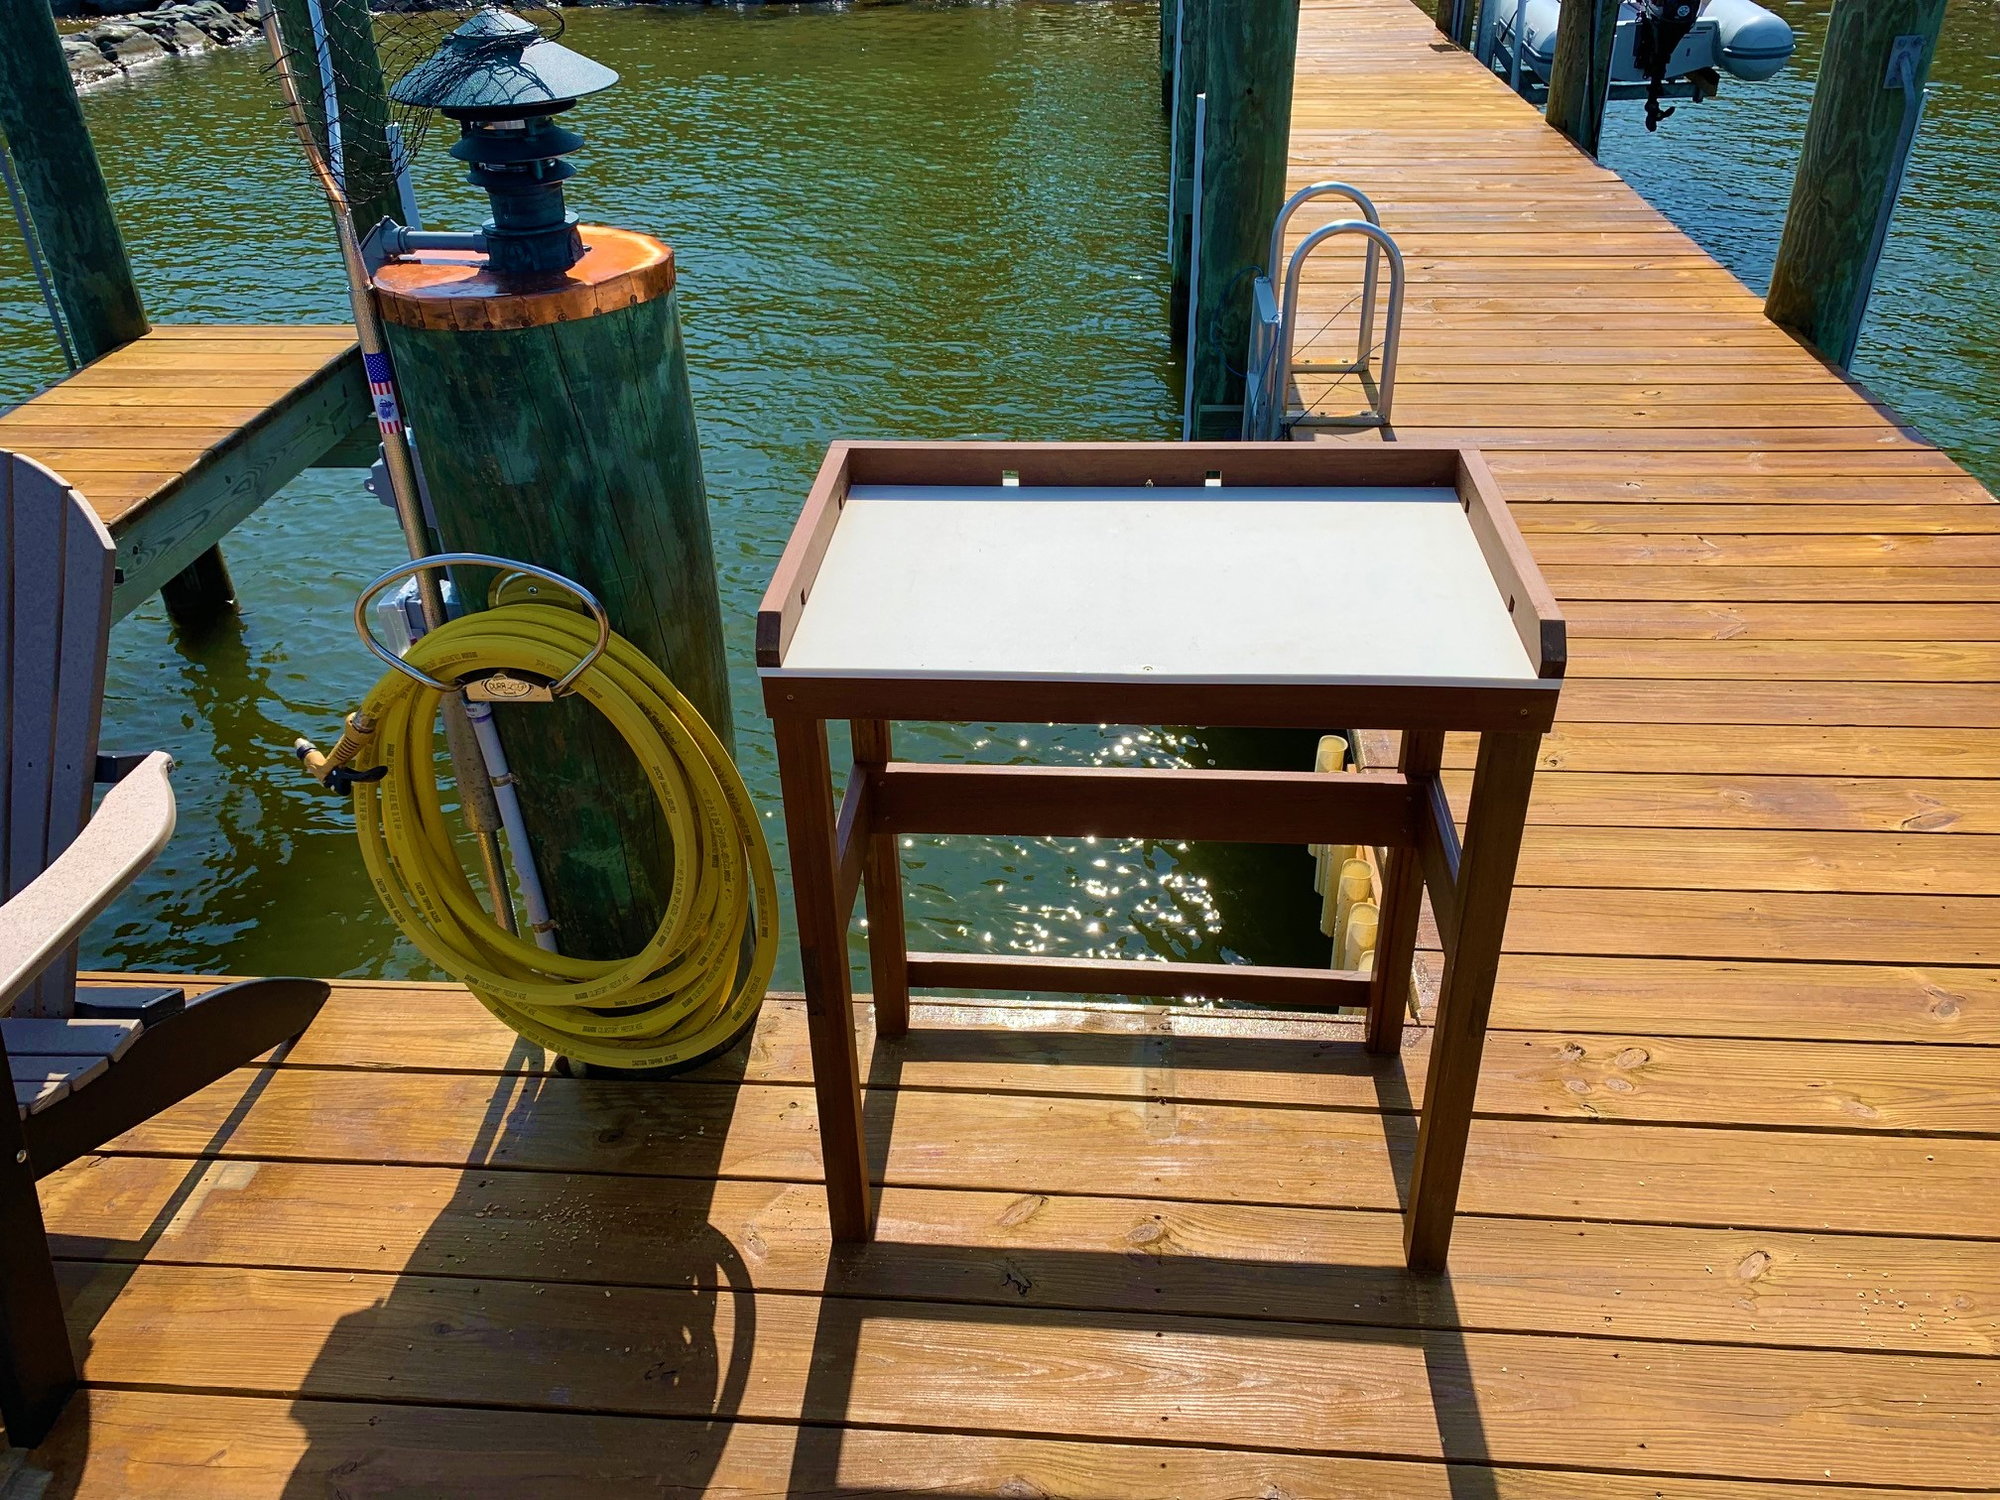 Homemade Fish Table For Dock - The Hull Truth - Boating and